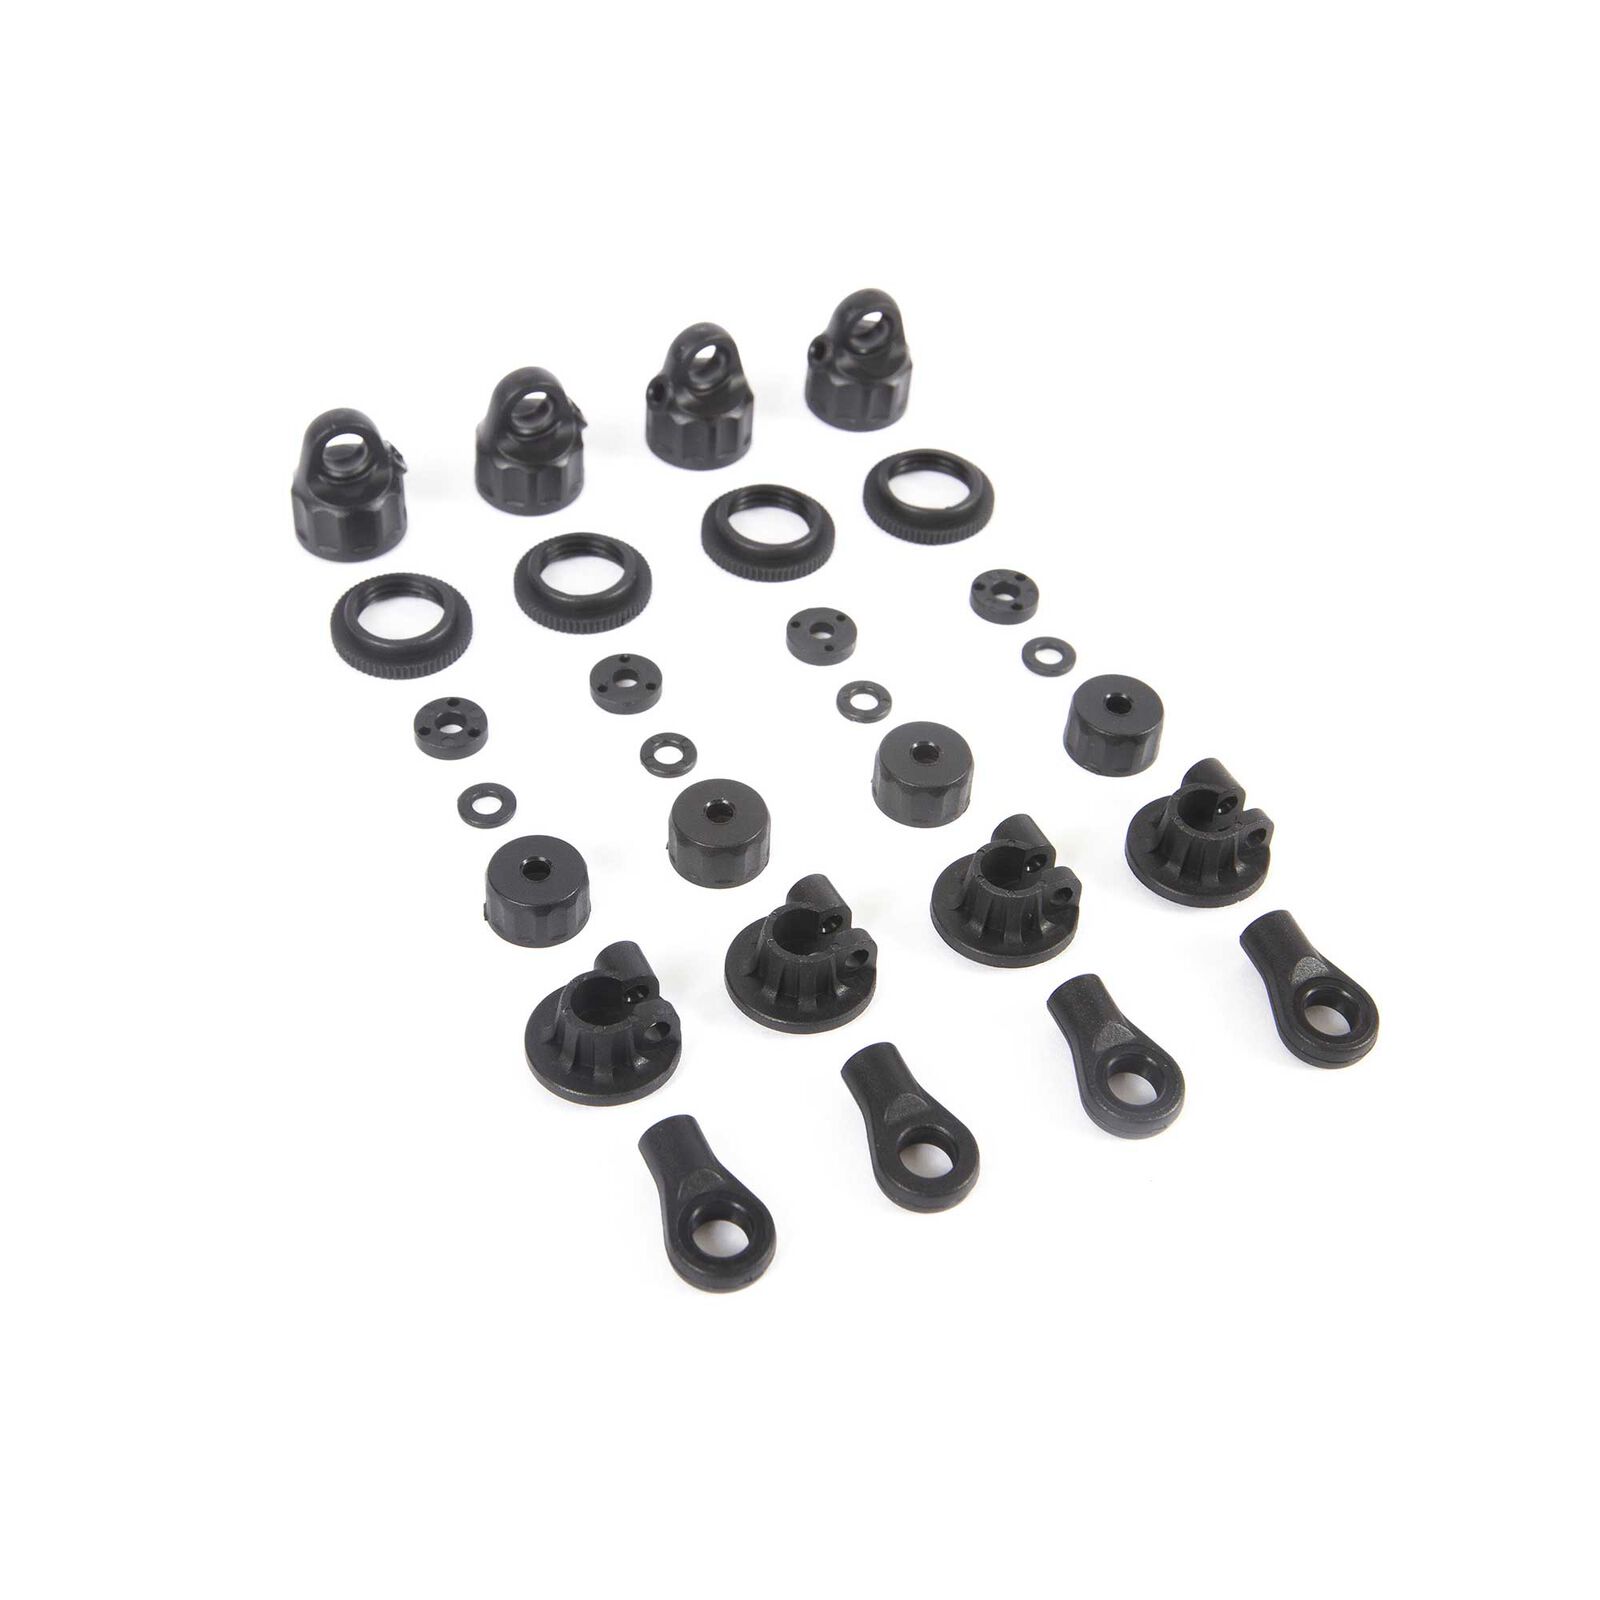 AXIAL Shock Parts, Injection Molded : Capra 1.9 UTB